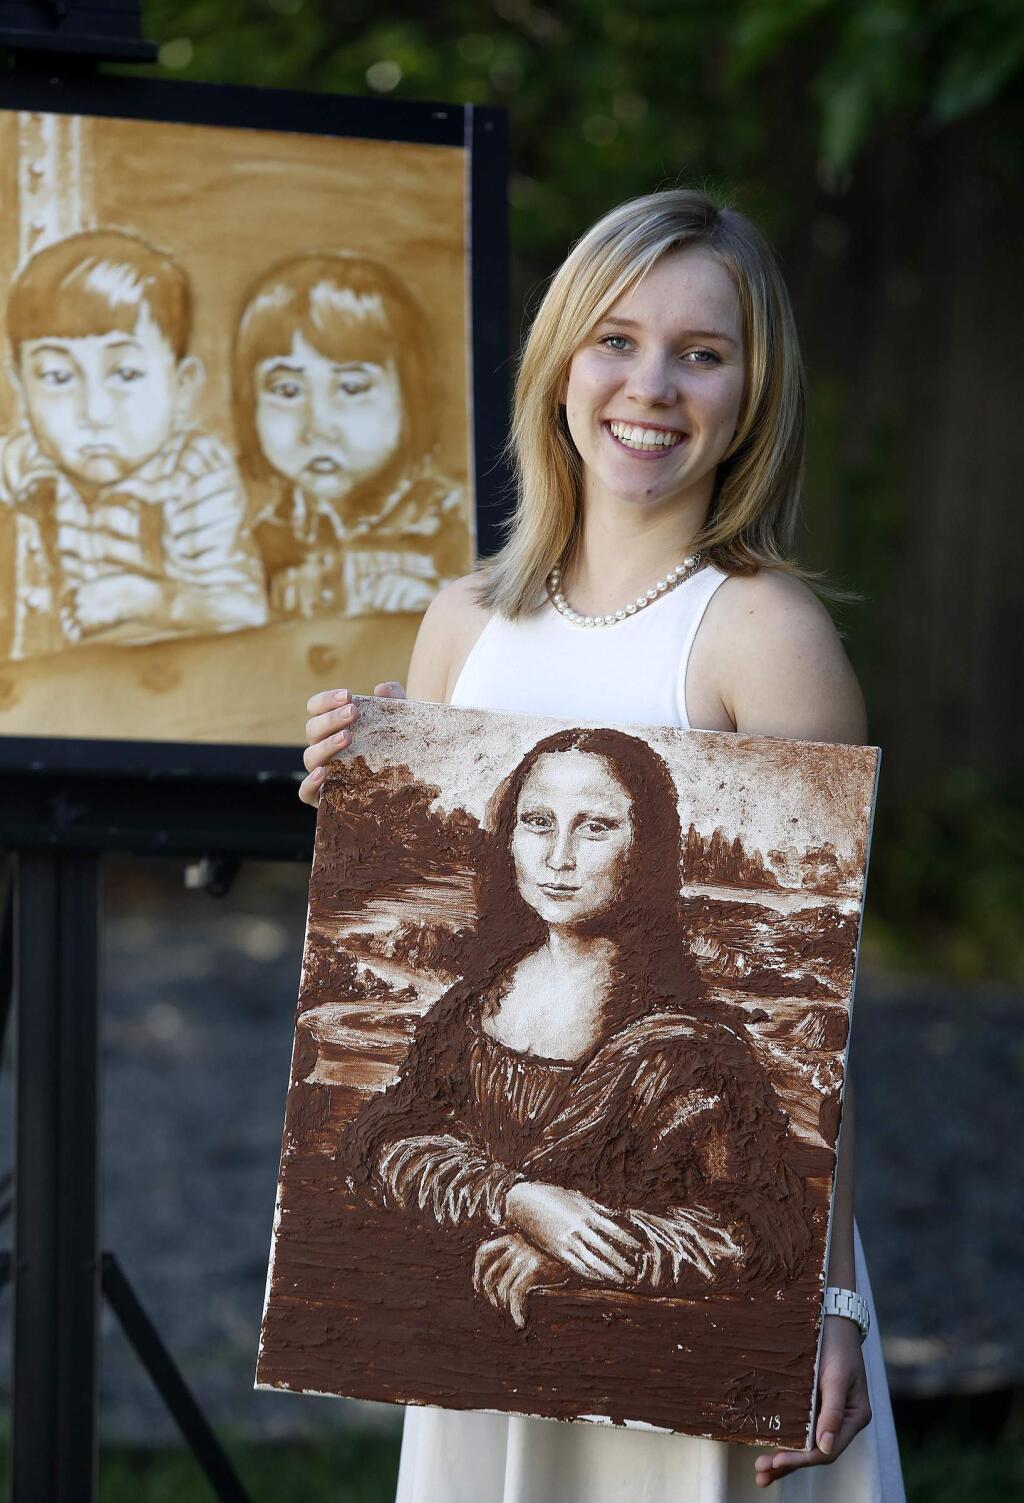 Bailey Farren, 17, holds a painting of the Mona Lisa made with chocolate frosting and behind her is a painting made with soy sauce. Photo taken at her home on Thursday, July 24, 2014 in Rohnert Park. (BETH SCHLANKER / The Press Democrat)